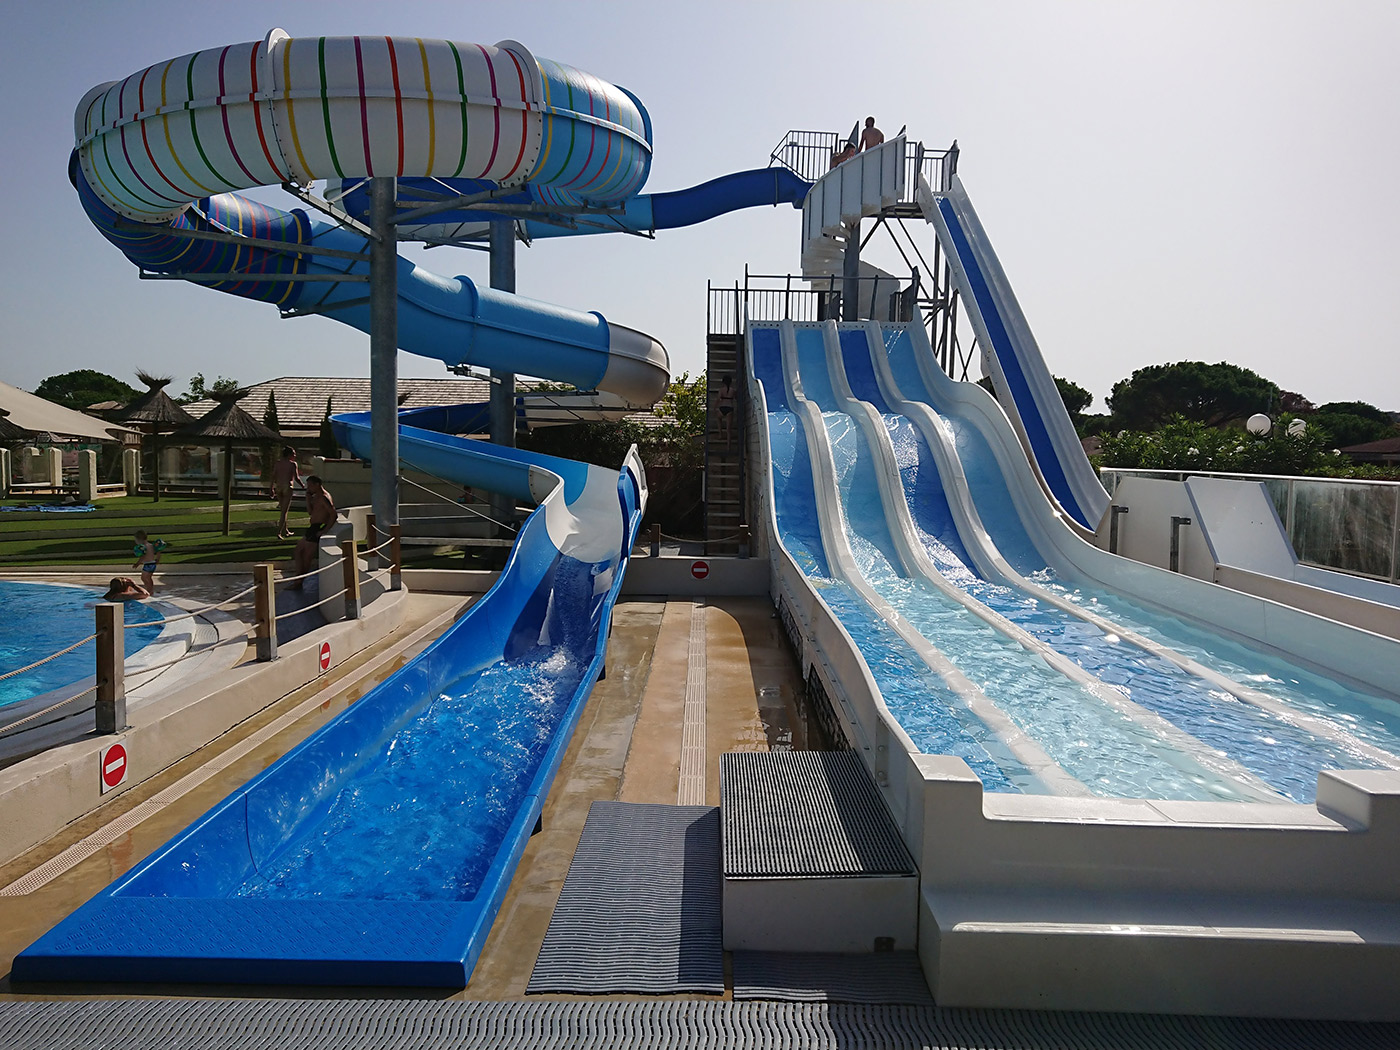 The family pool with water slides